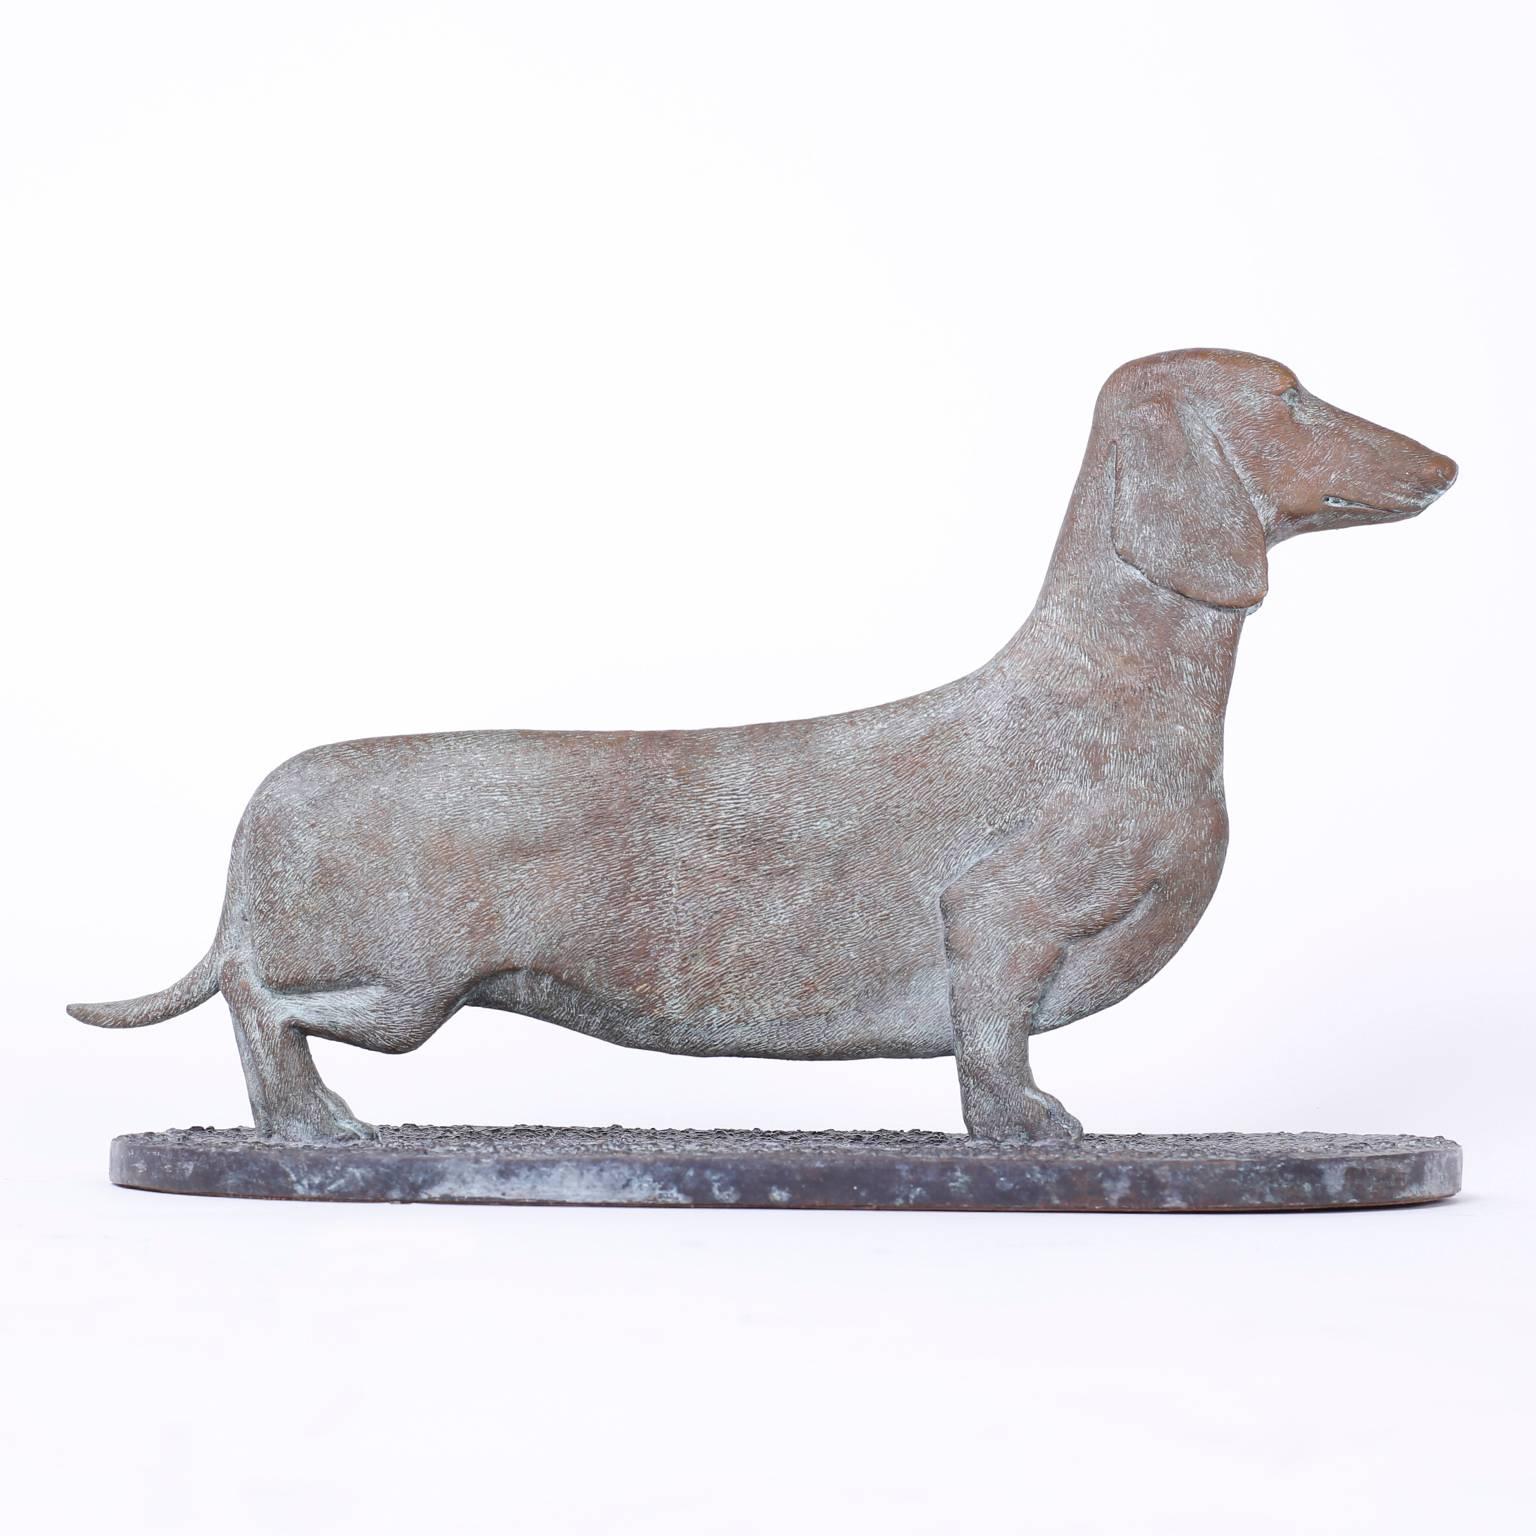 Handsome Mid-Century cast bronze dachshund dog sculpture with stylized vertigree patina over an alert, proud stance. Signed on the bottom Maitland-Smith.